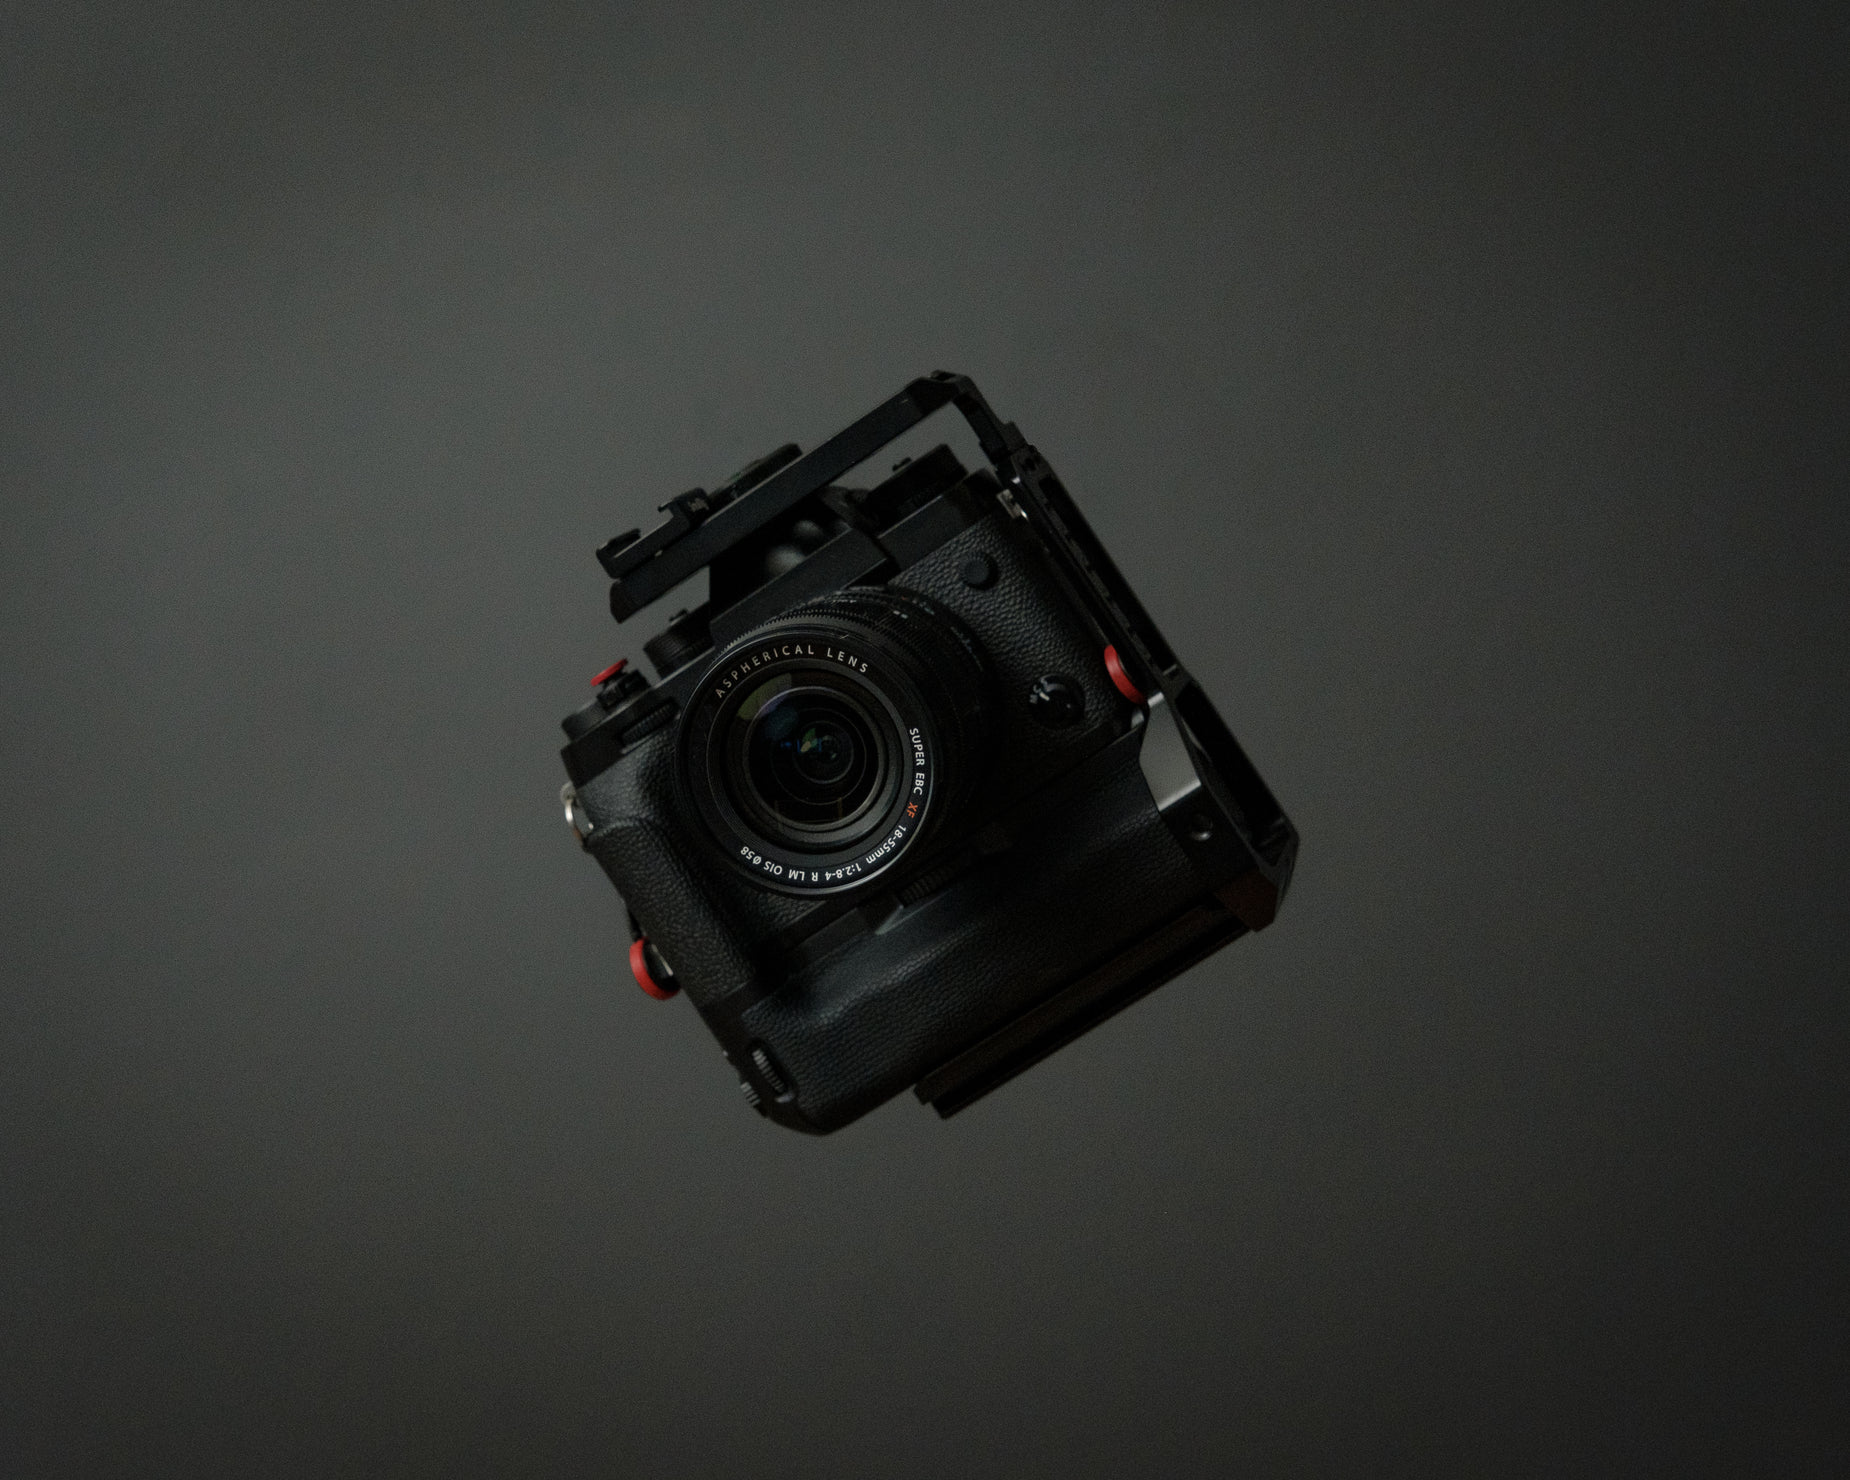 an analog camera is seen from above, on the dark surface